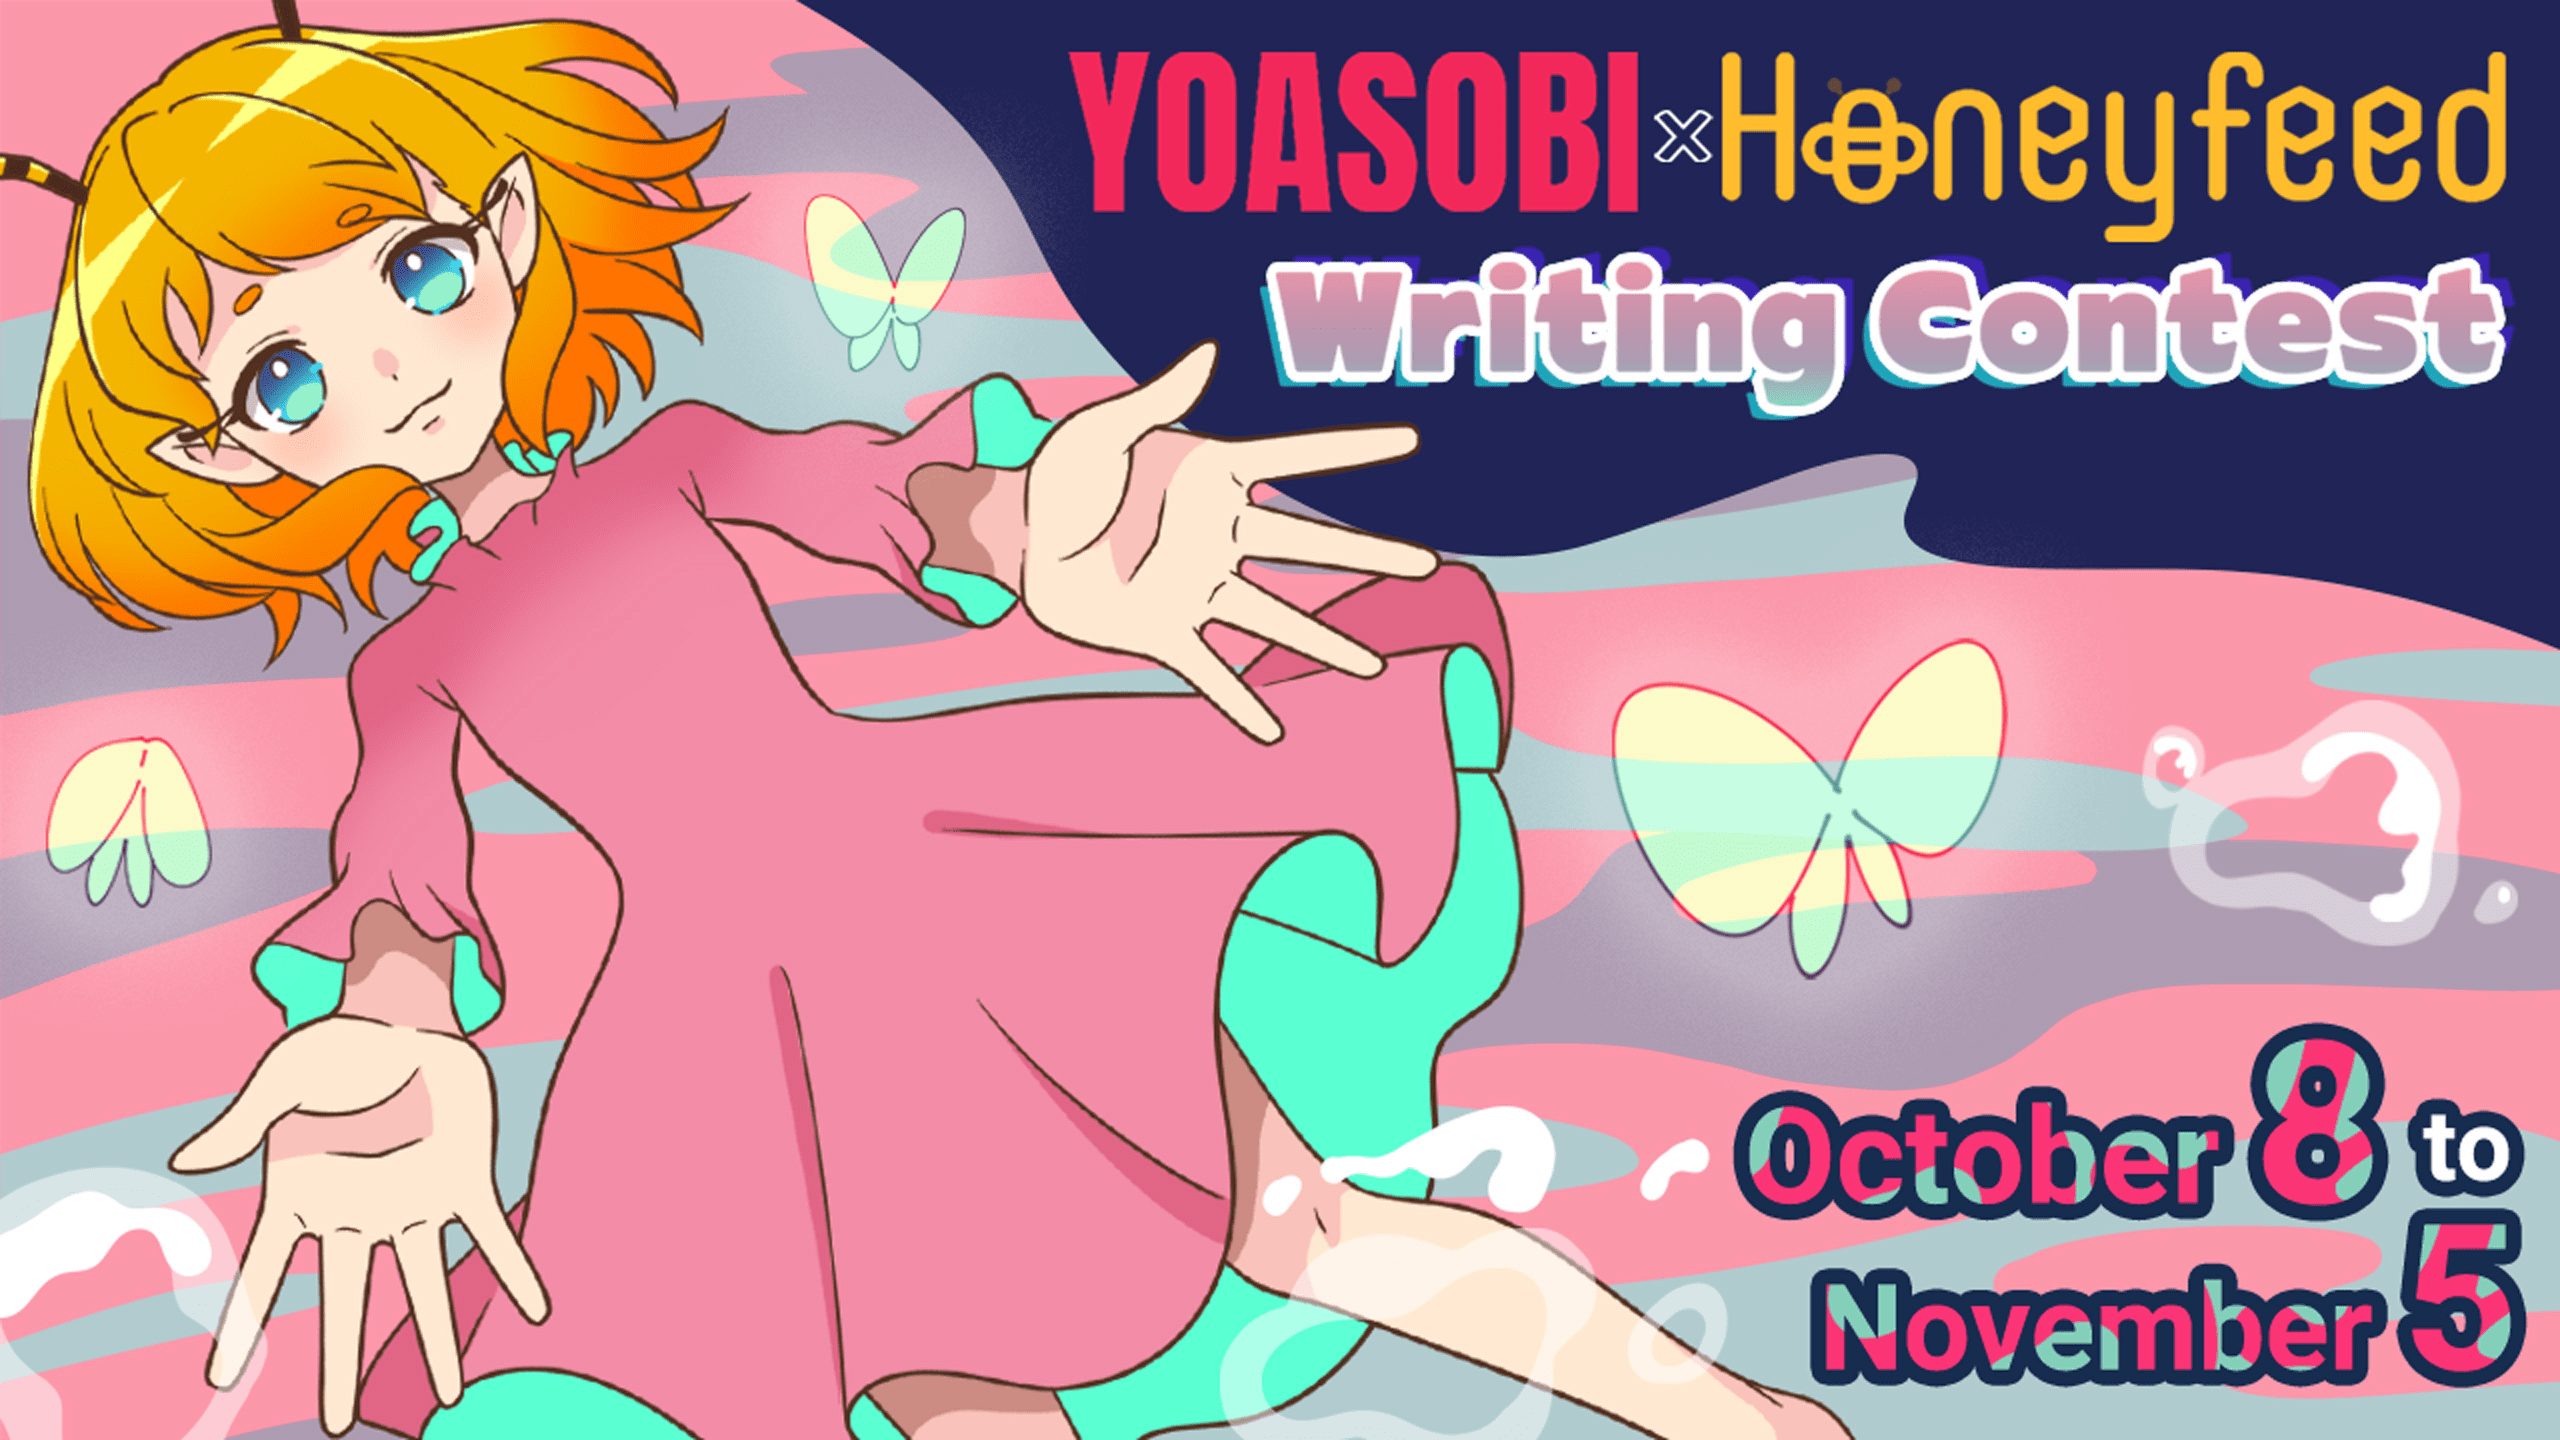 YOASOBI-x-Honeyfeed-writing-contest-Keyvisual YOASOBI x Honeyfeed Writing Contest Begins October 8 - Chance for Your Story to Be Recognized as an Official Spin-off of “Into The Night”